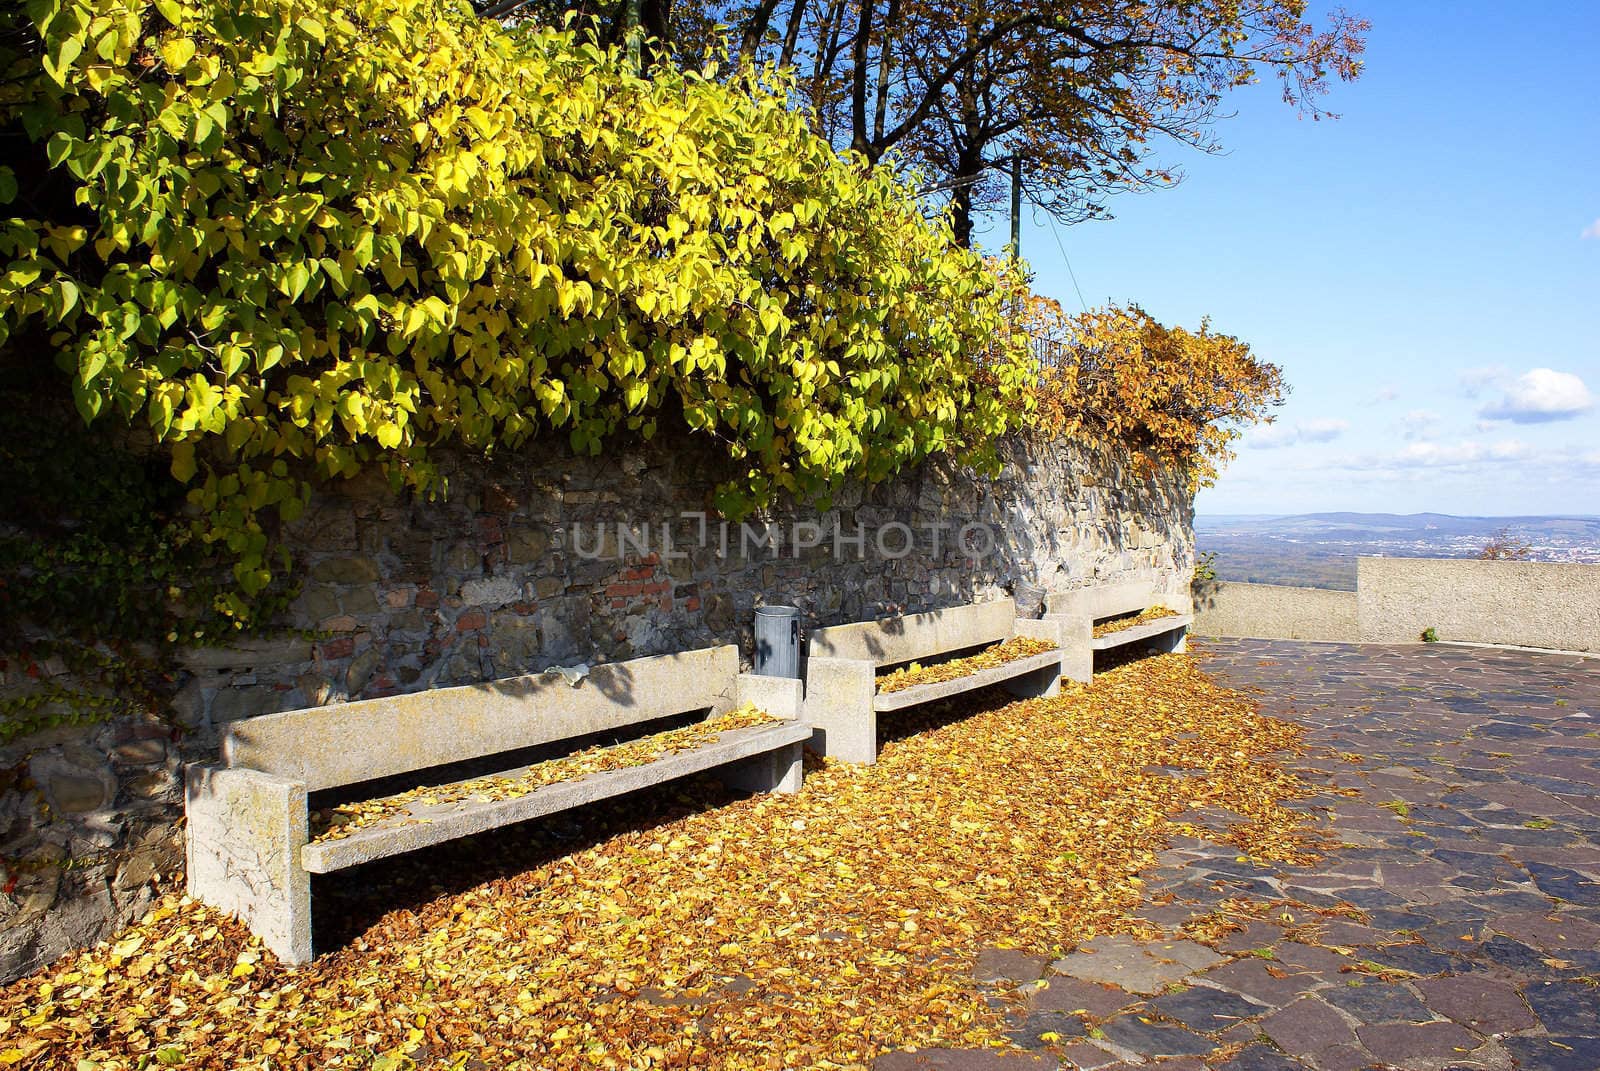 Three benches covered with leaves on a sunny day in autumn.